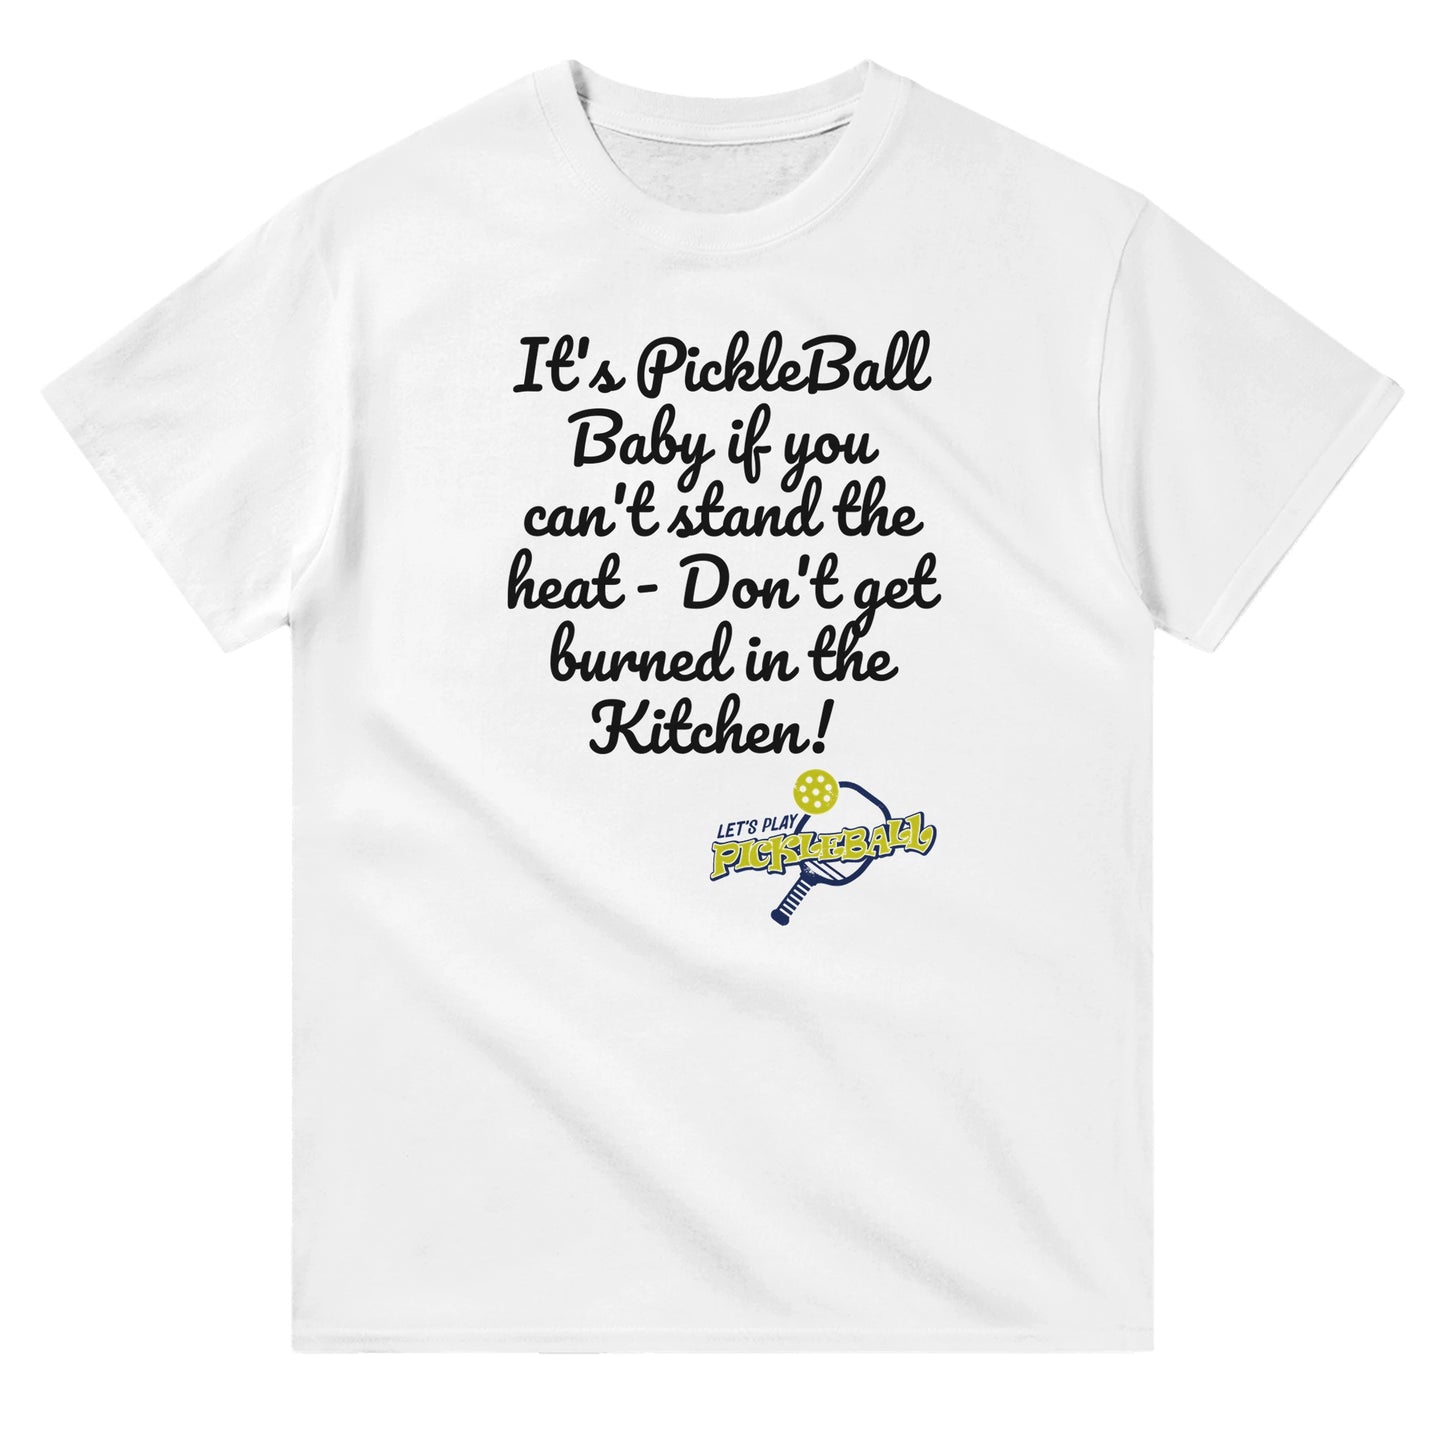 White comfortable Unisex Crewneck heavyweight cotton t-shirt with funny saying It’s PickleBall Baby if can’t stand the heat – Don’t get burned in the Kitchen!  and Let’s Play Pickleball logo on the front from WhatYa Say Apparel lying flat.